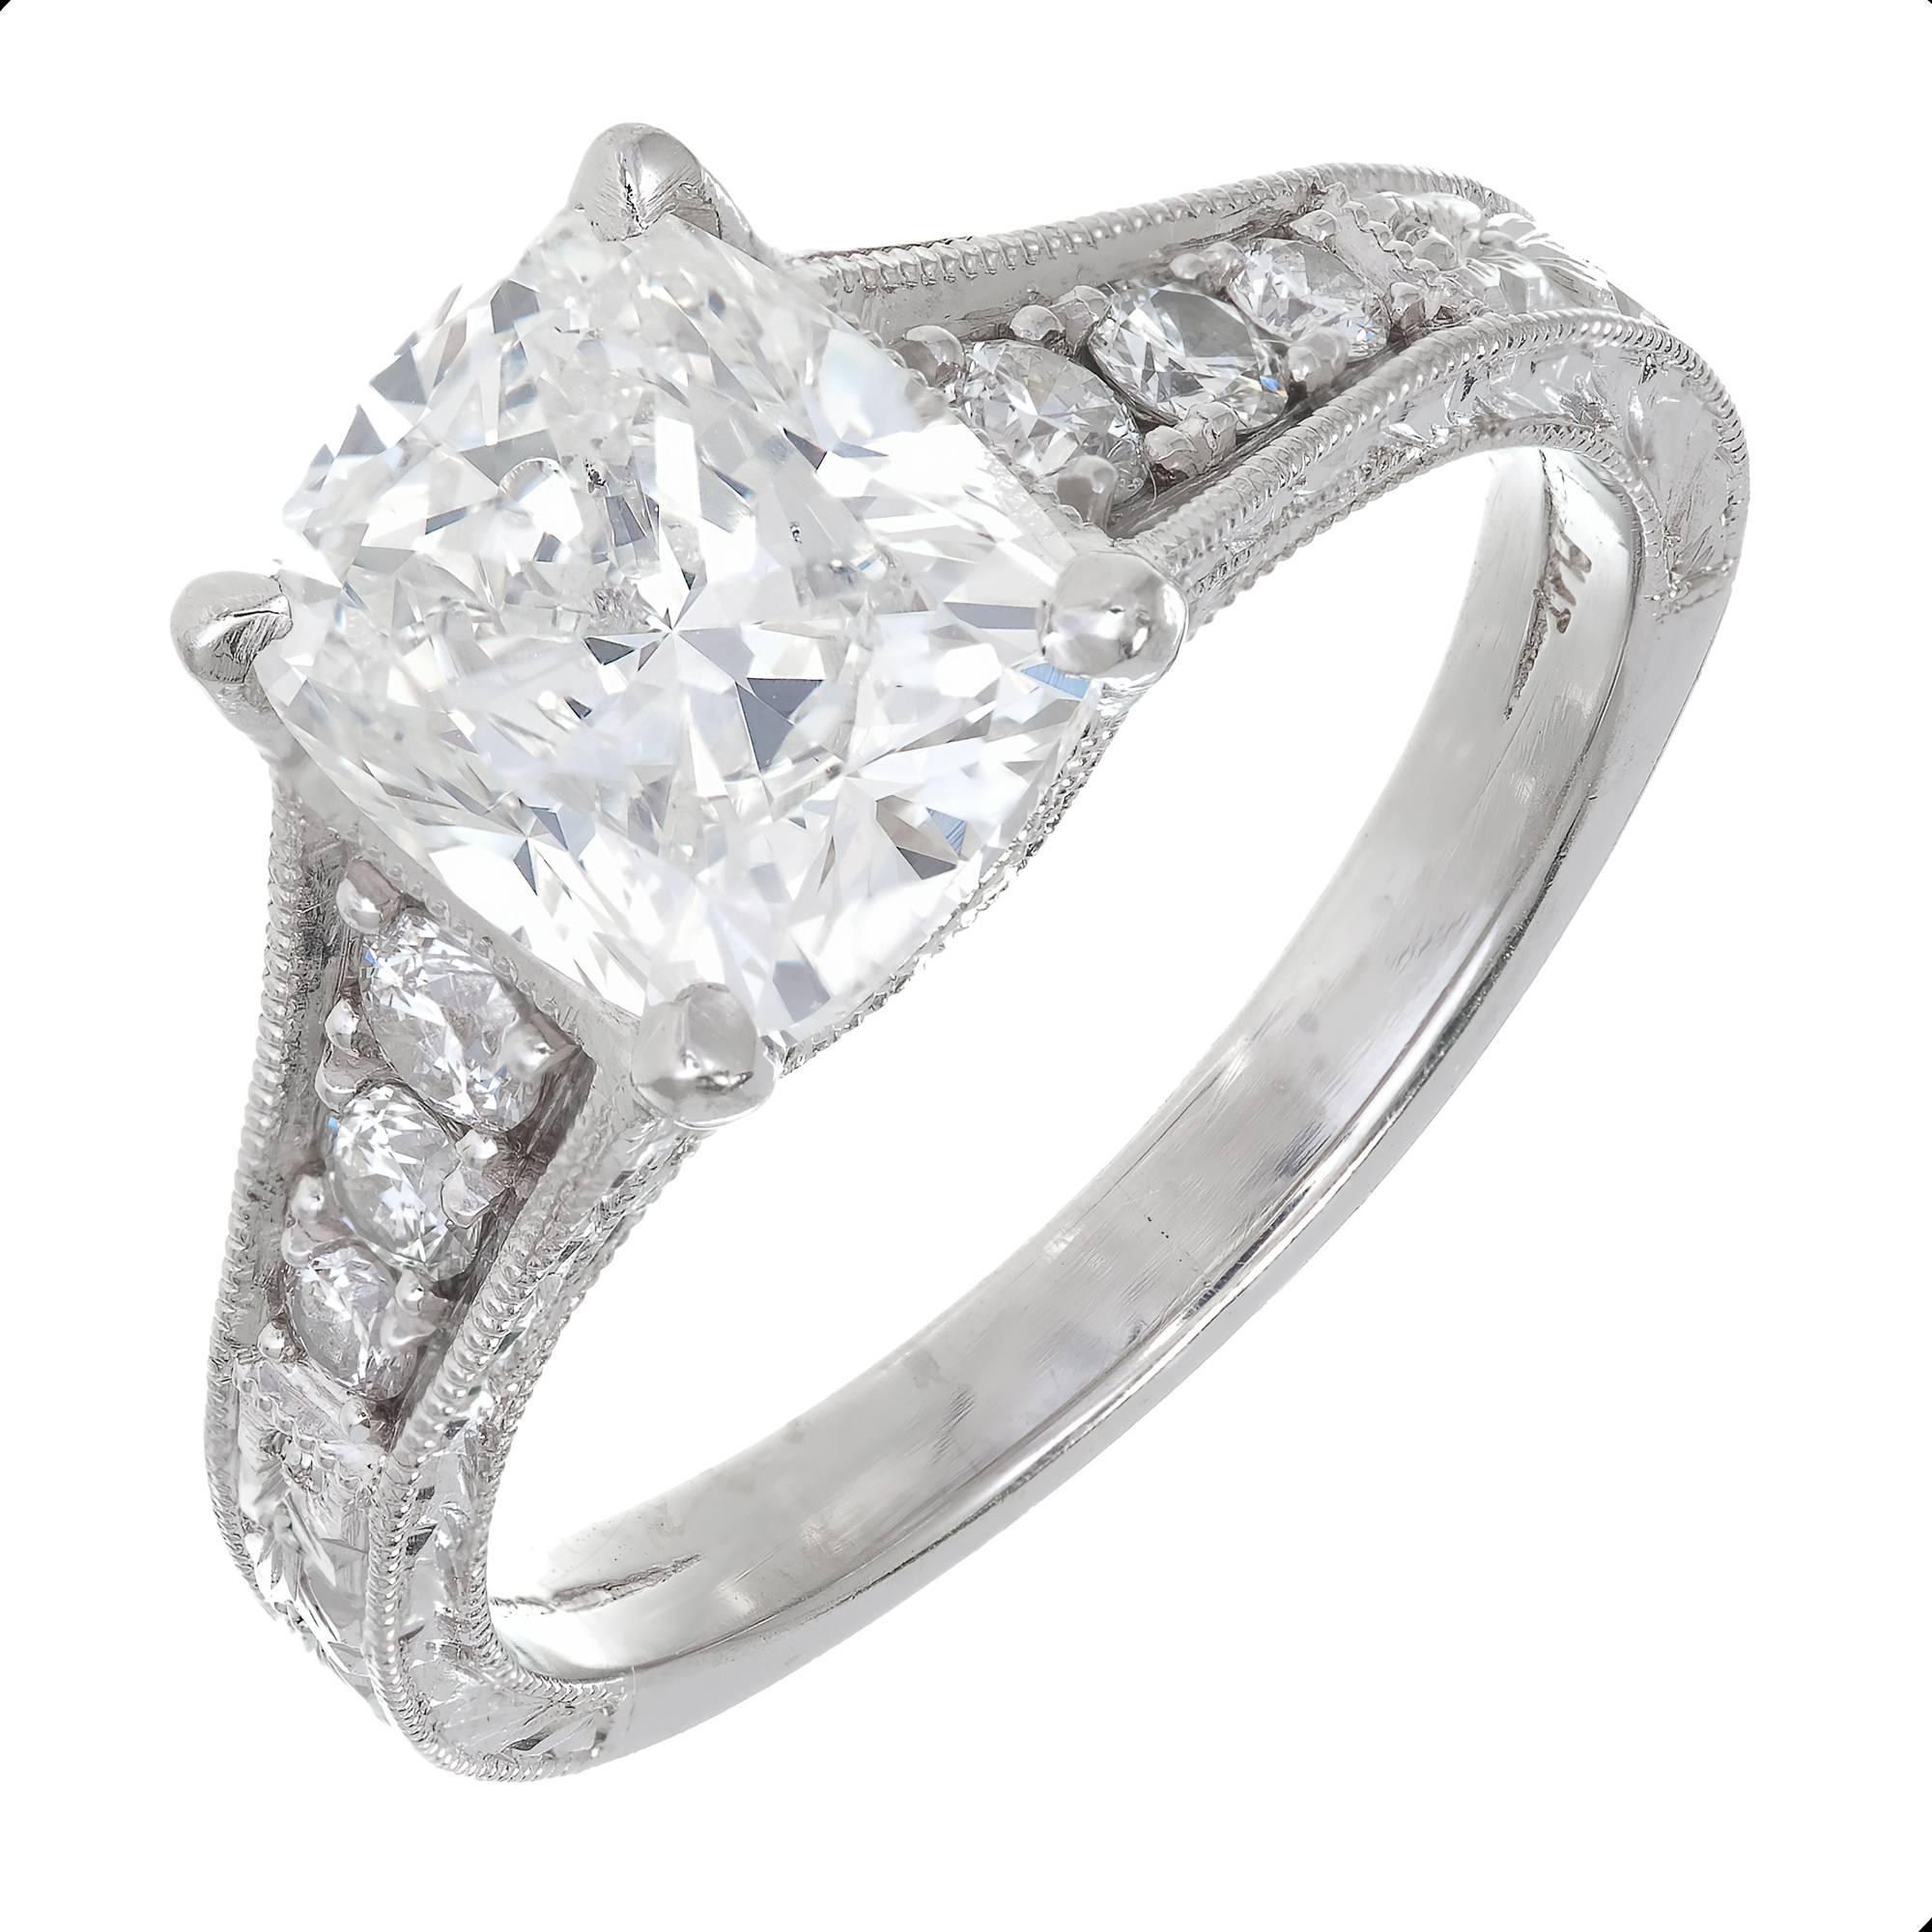 Peter Suchy cushion cut diamond platinum engagement ring. Handmade Platinum ring from the Peter Suchy workshop designed and made just for this stone. End to end and top to bottom sparkle. 

1 GIA certified cushion cut diamond, approx. total weight